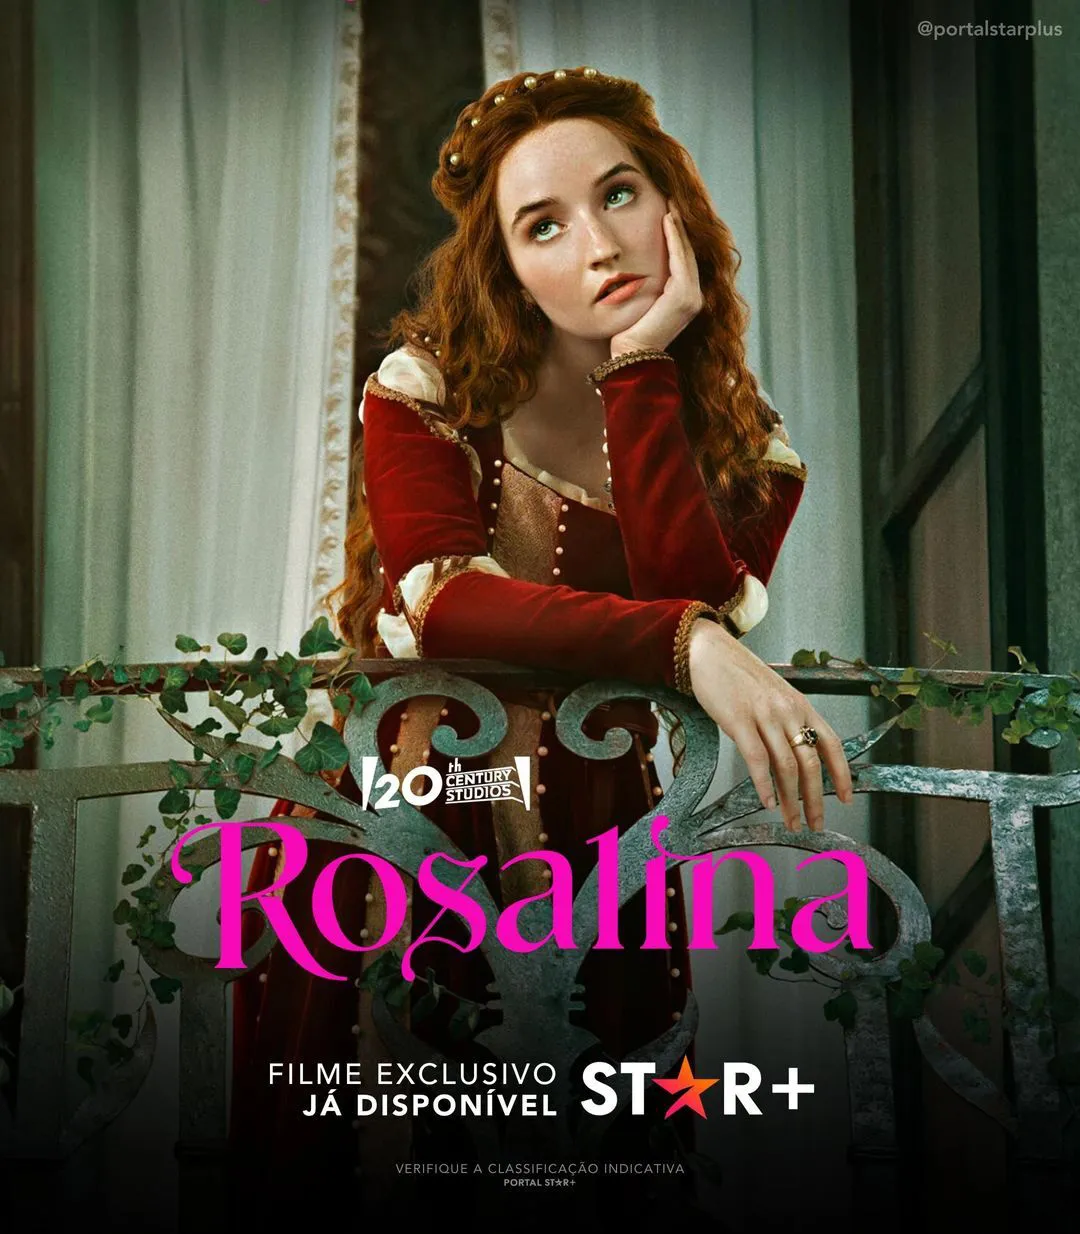 'Rosaline' will be streamed on 2.10, Romeo is caught in the entanglement of his ex-girlfriend | FMV6